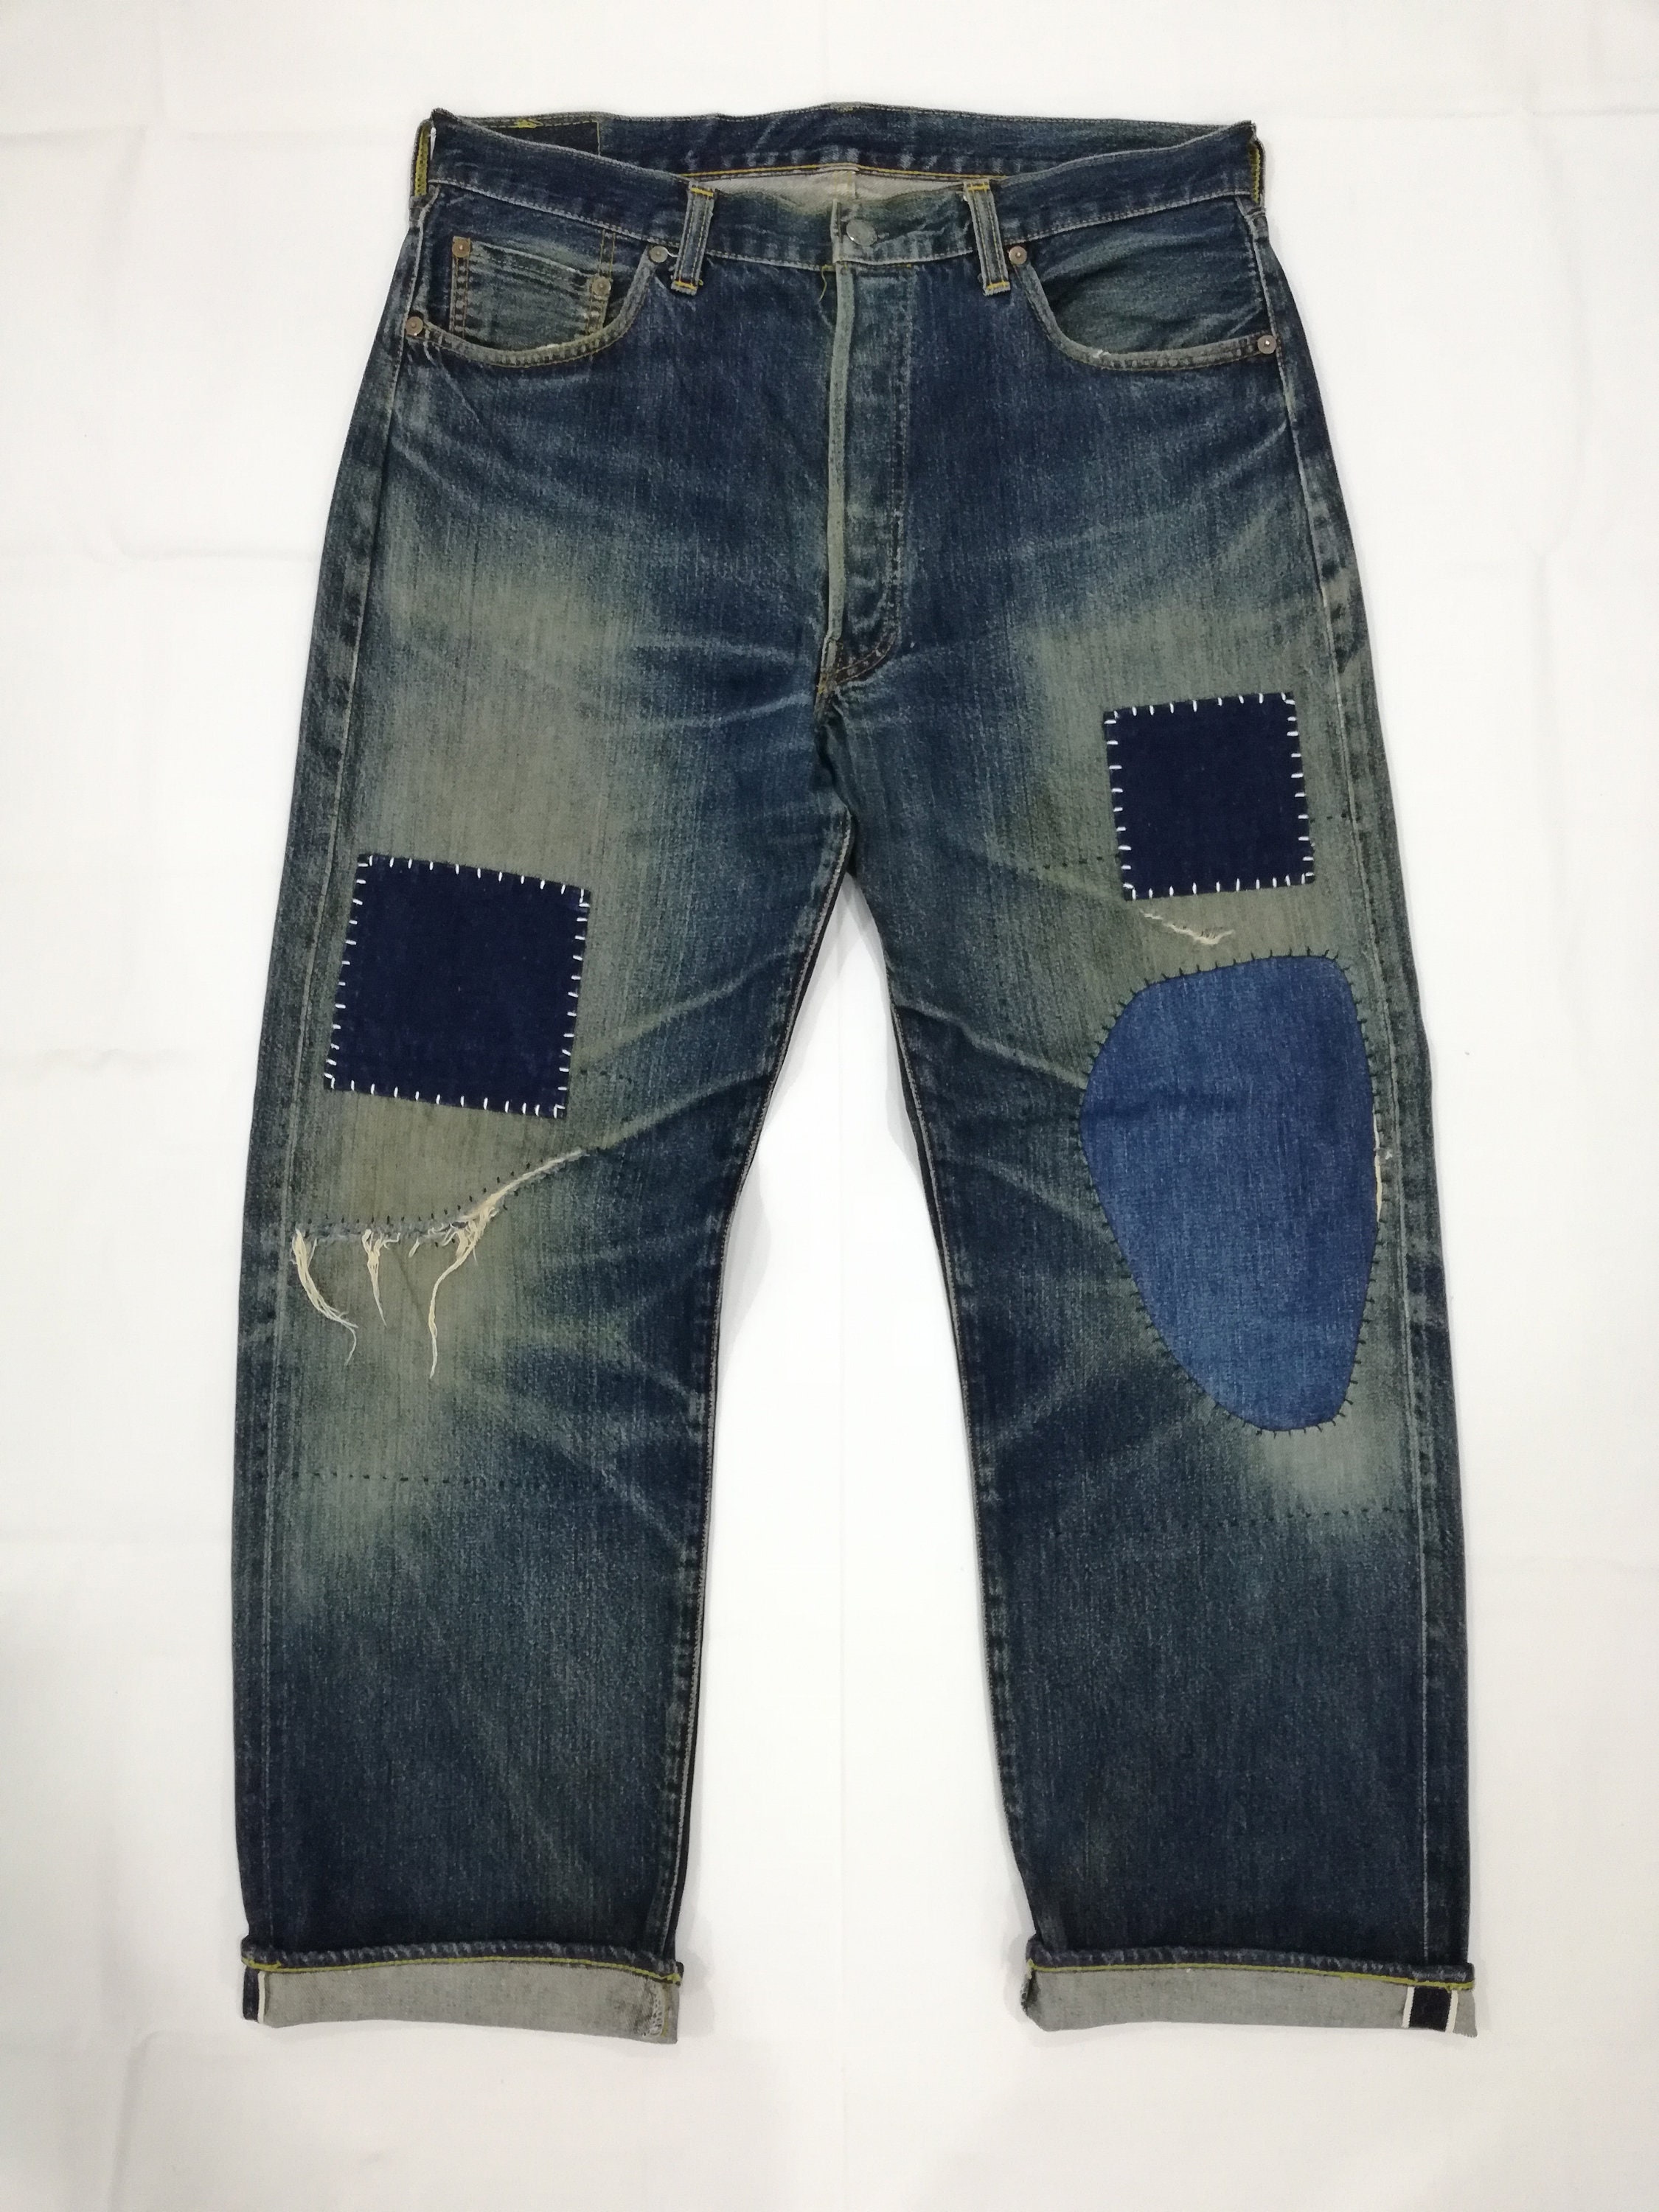 Levi's LVC 1955 Reproduction Jeans, Cone Denim with Red Line Selvedge, –  Style & Salvage